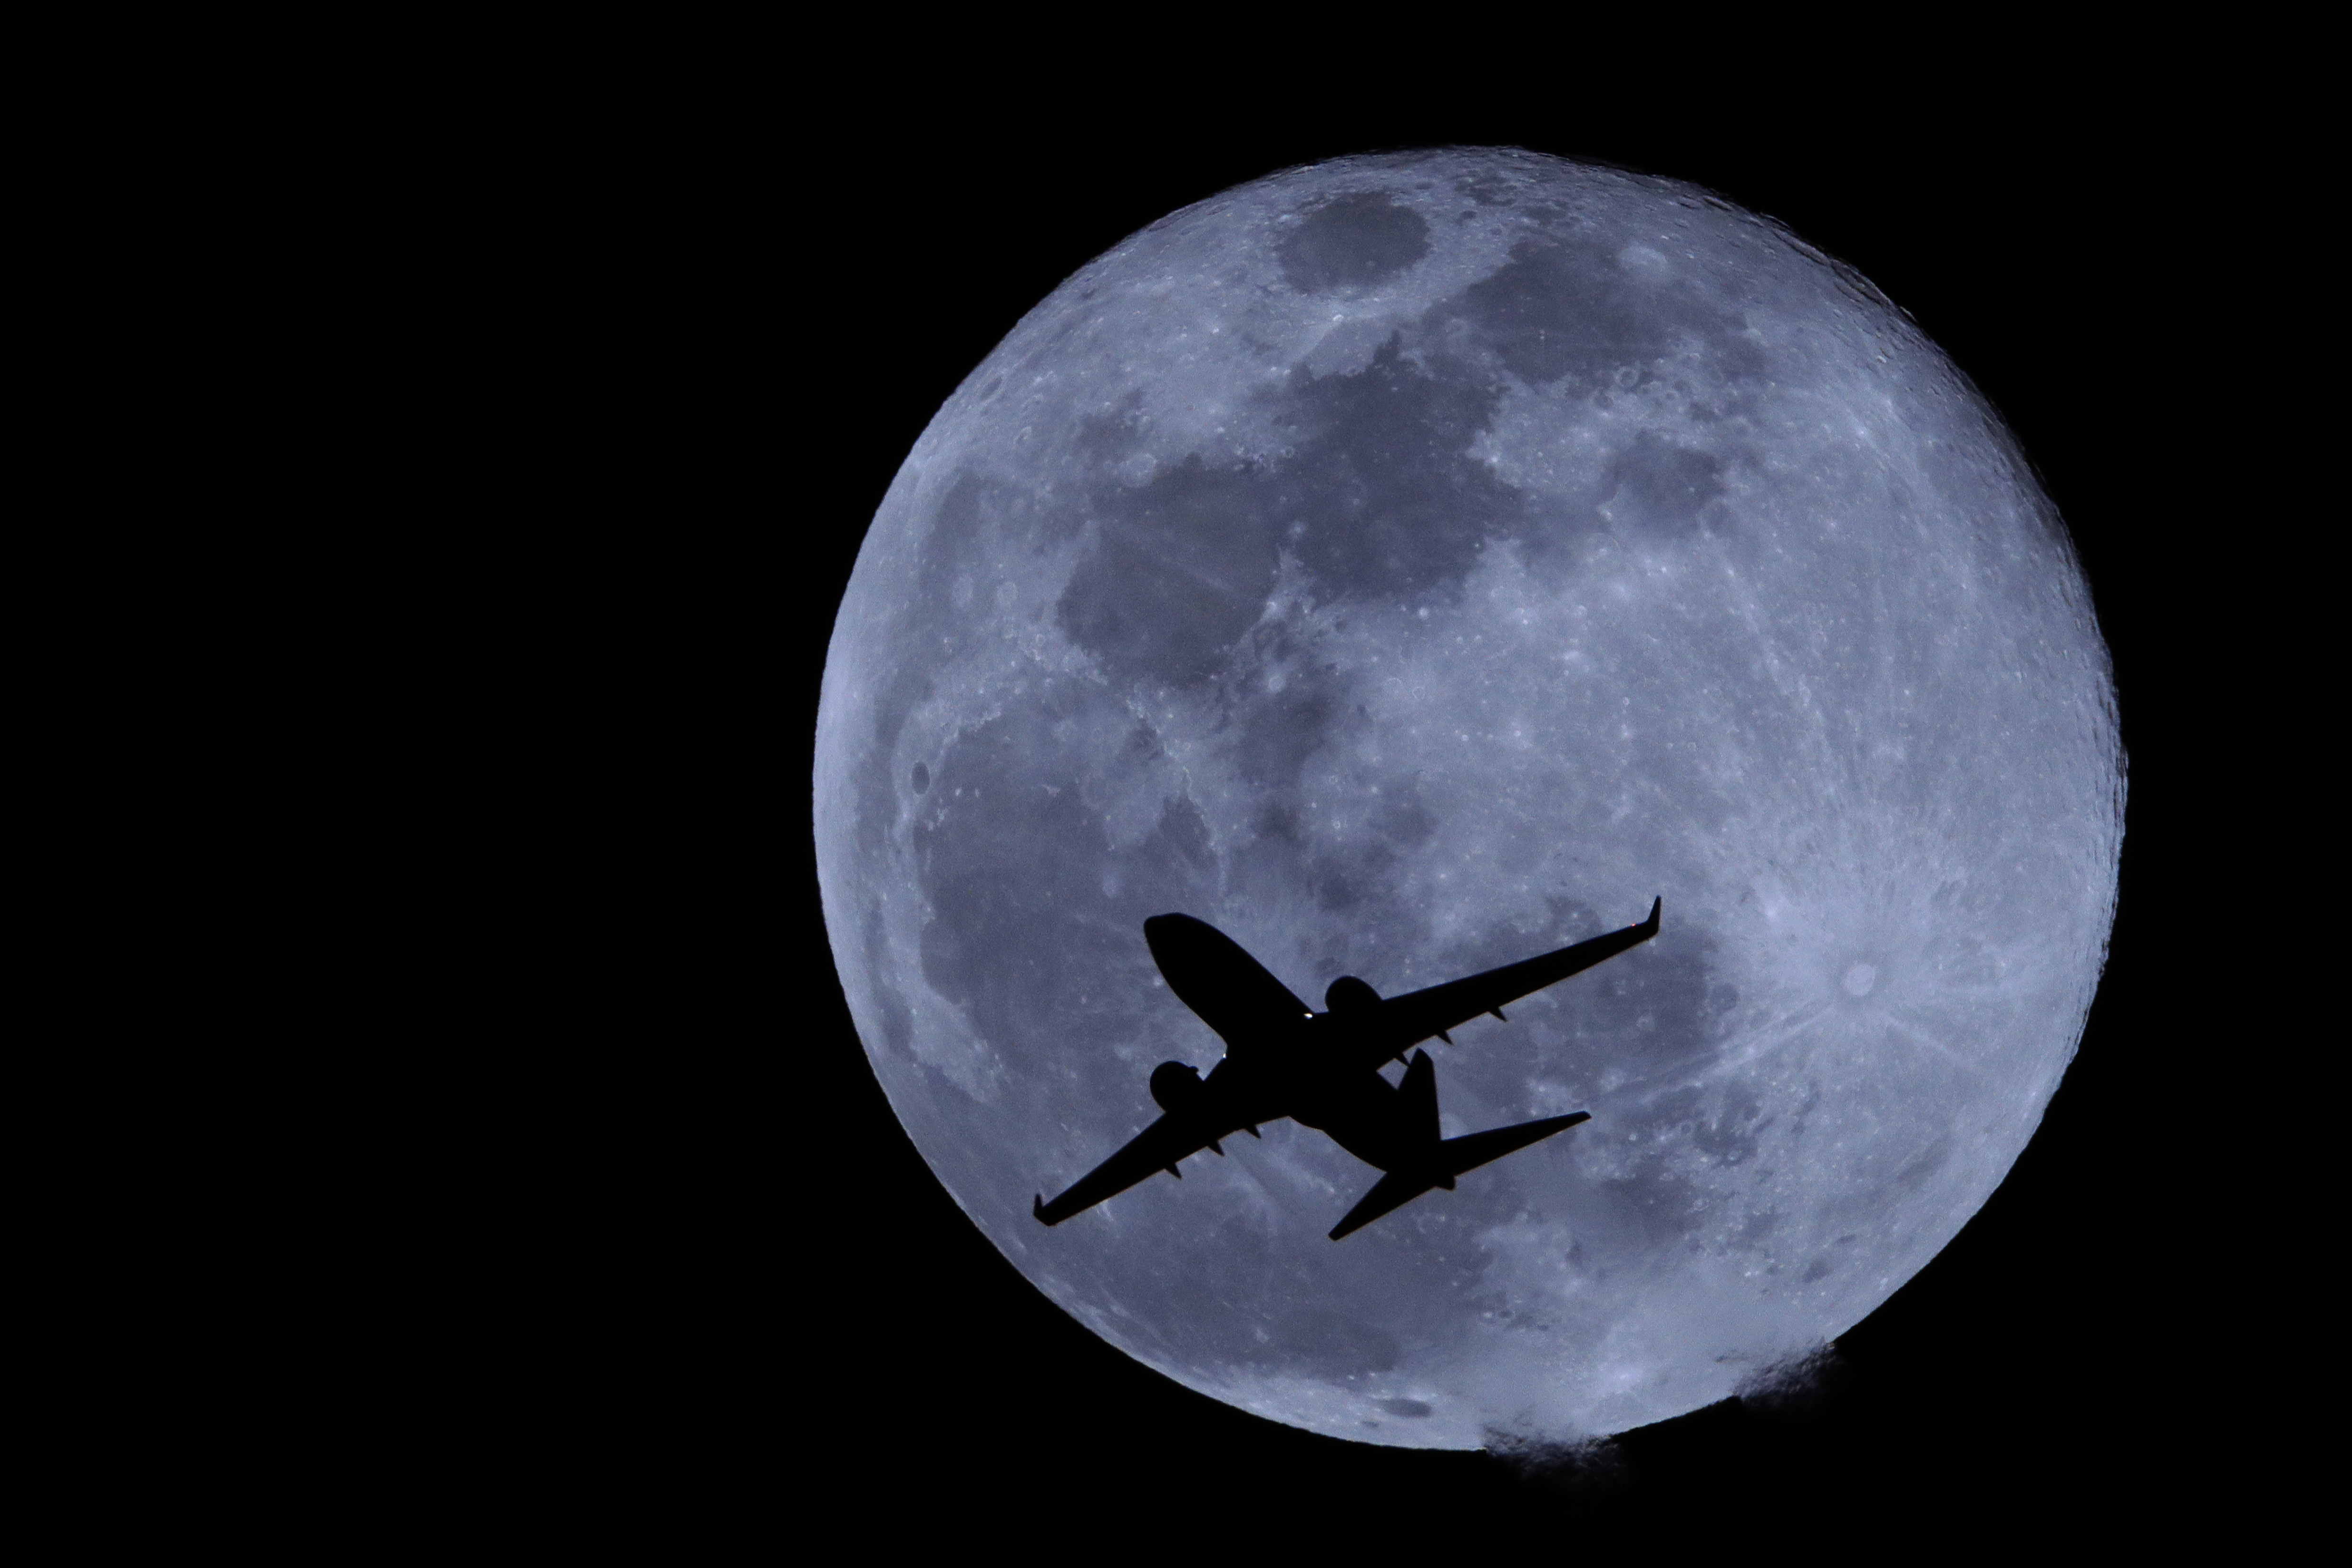 A passenger jet is silhouetted against the full moon in Phoenix, Arizona